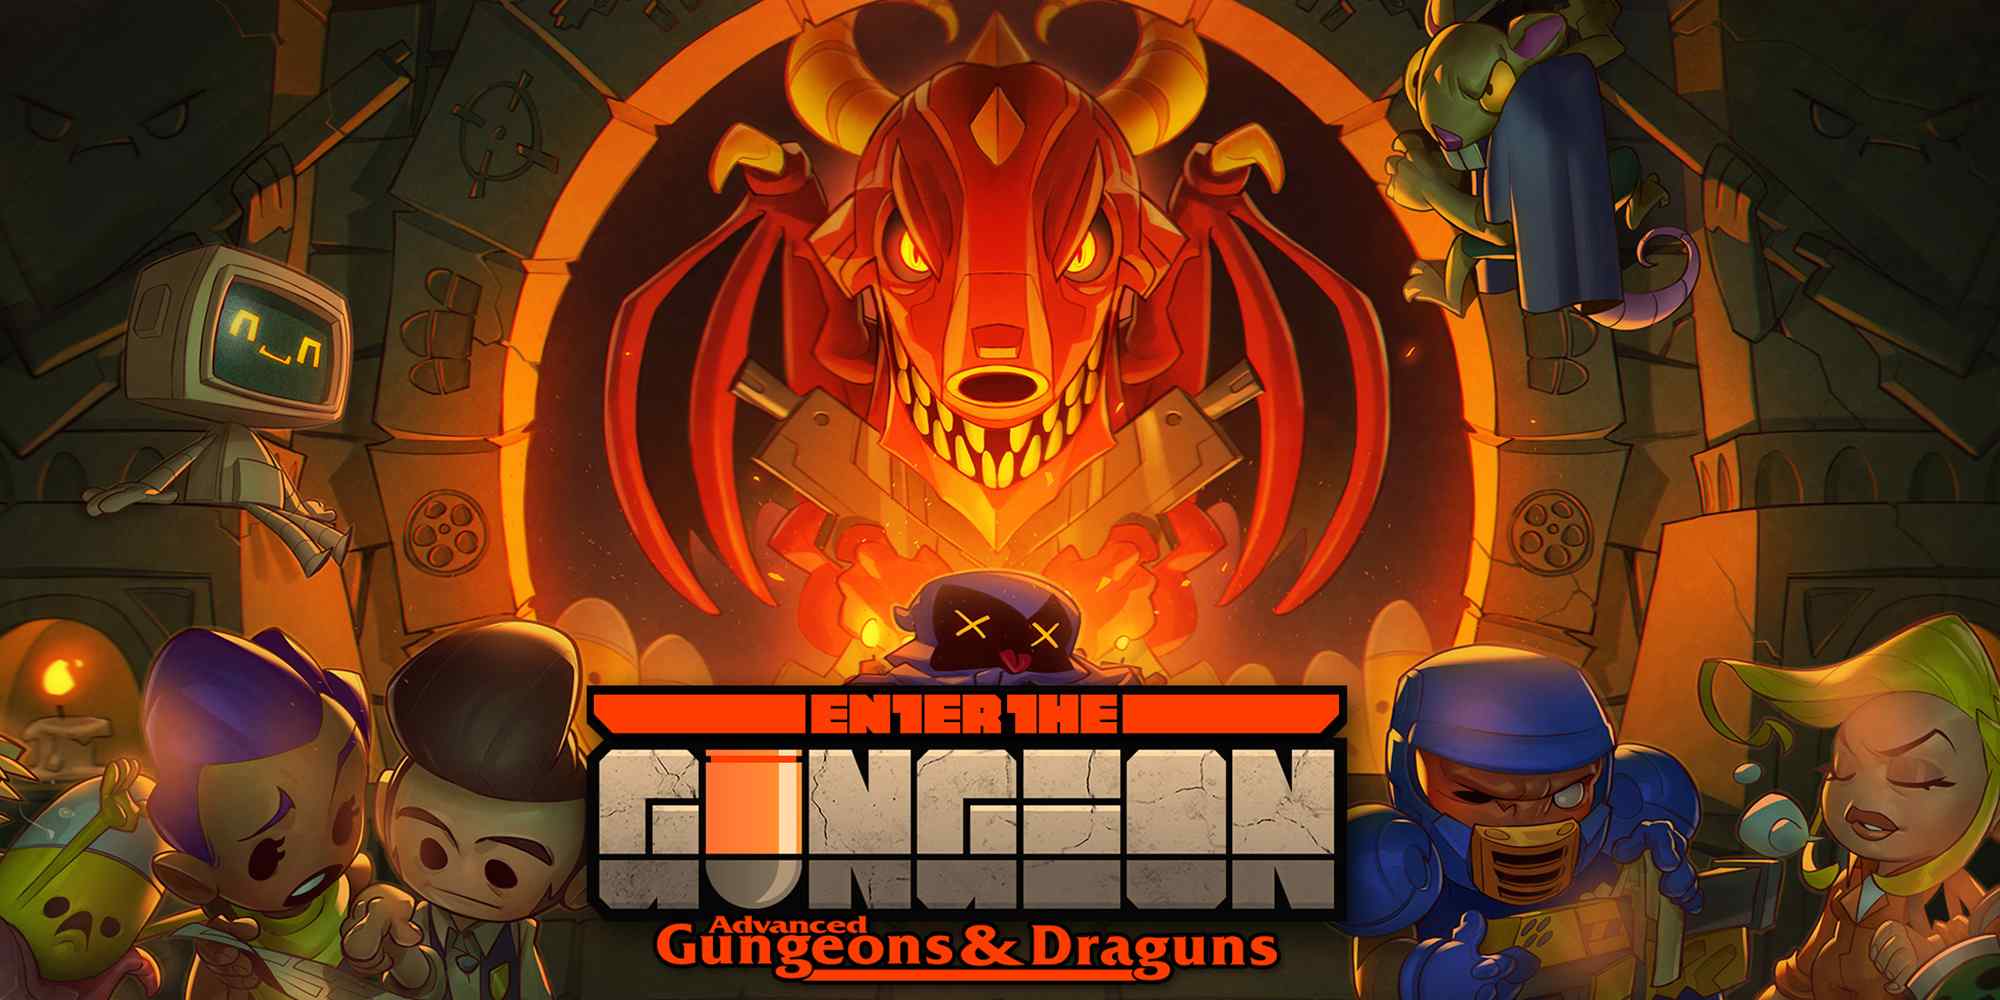 Enter the Gungeon": A rollercoaster of emotions as players dive into a bullet-filled labyrinth, fueled by adrenaline, anticipation, and determination to conquer this intense rogue-like journey.